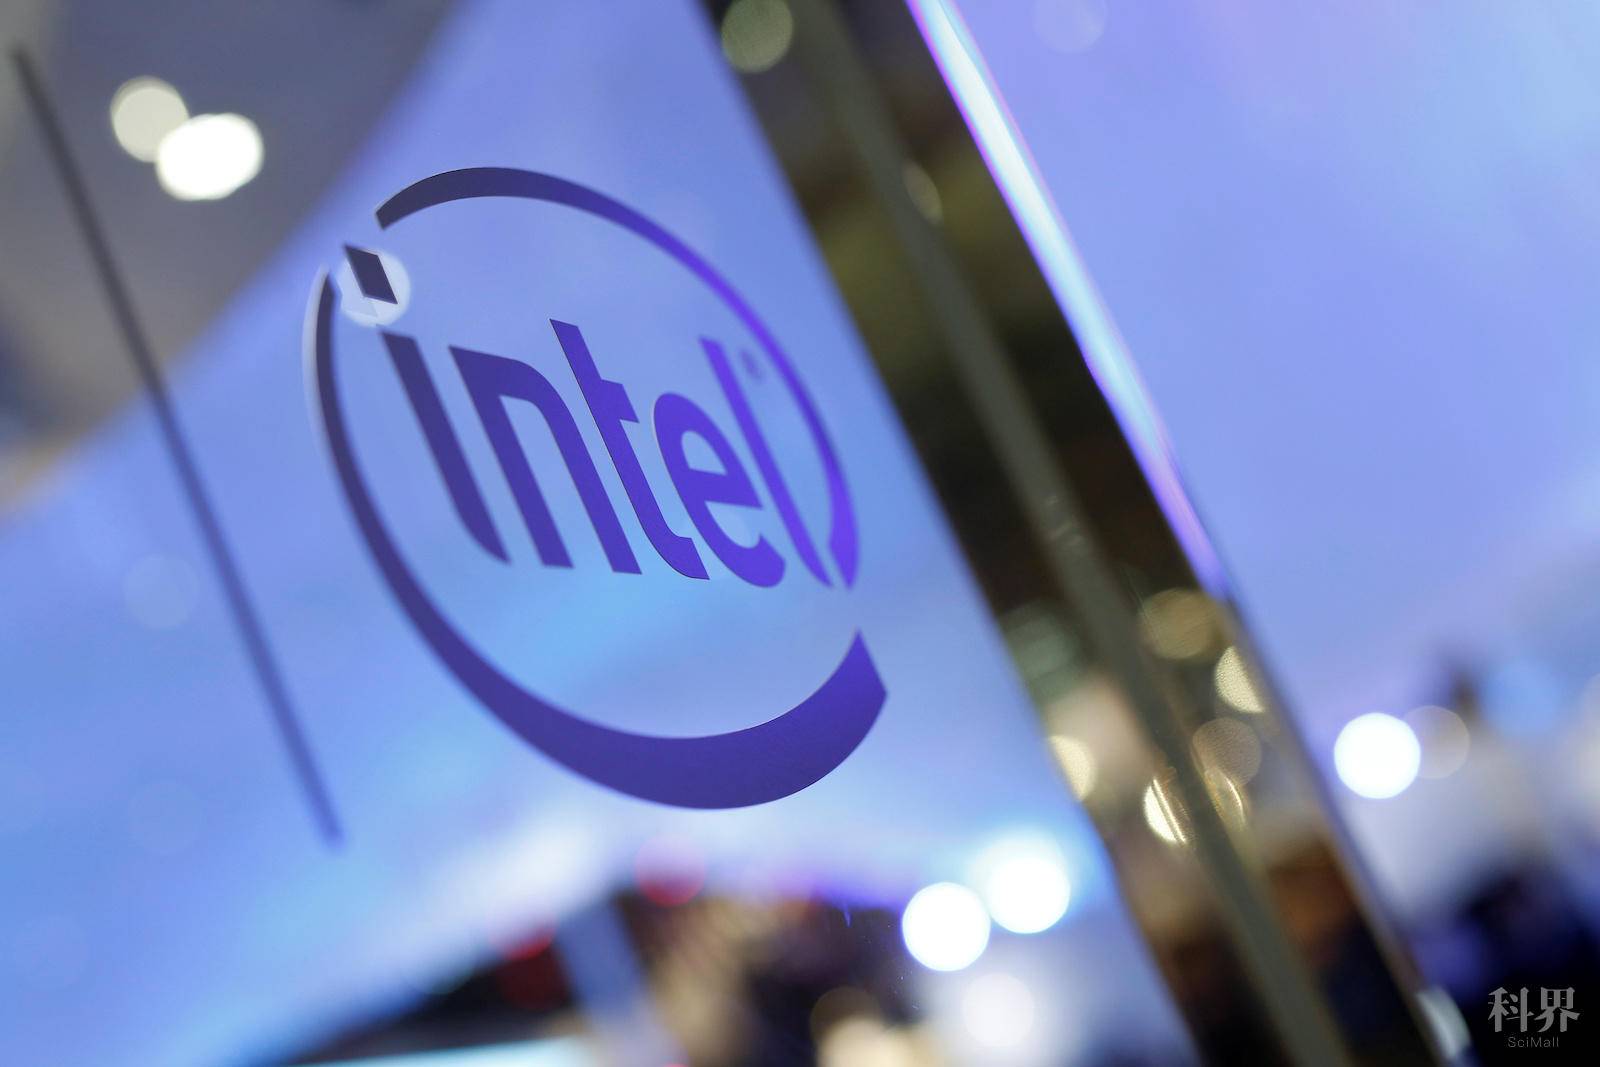 The logo of Intel is seen during the annual Computex computer exhibition in Taipei, Taiwan June 1, 2016. REUTERS/Tyrone Siu - D1BETHJEVYAA